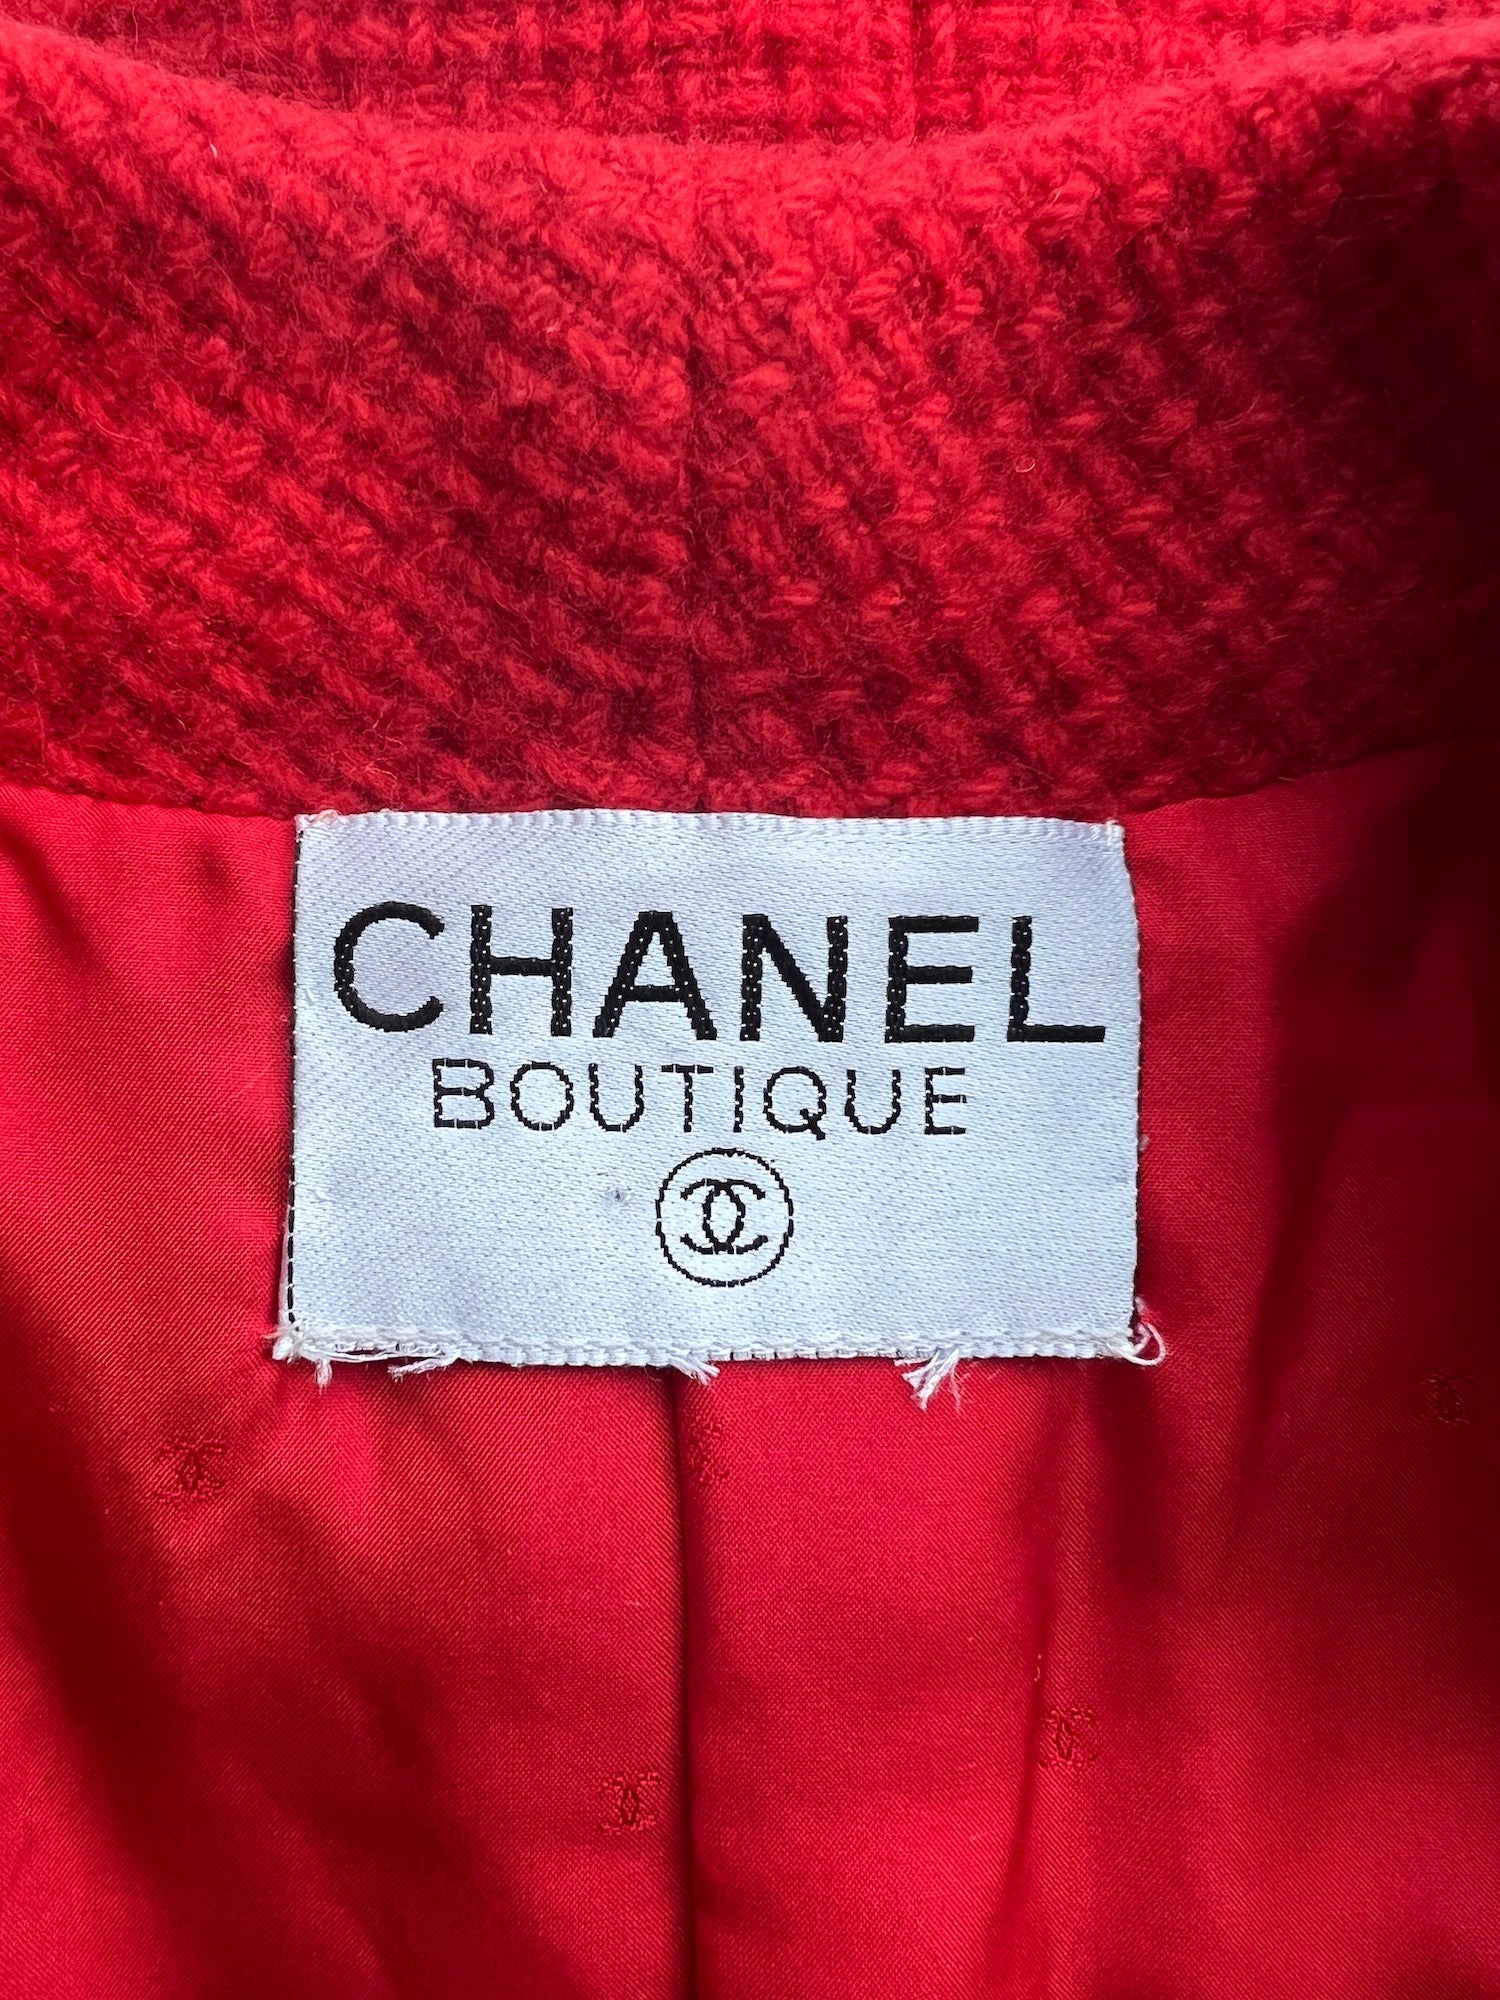 CHANEL 91A Vintage Coral Pink Red Wool Gold Button Jacket 36 38 42 シャネル ヴィンテージ・コーラルピンク・レッド・ウール・ゴールド・ボタン・ジャケット 即発